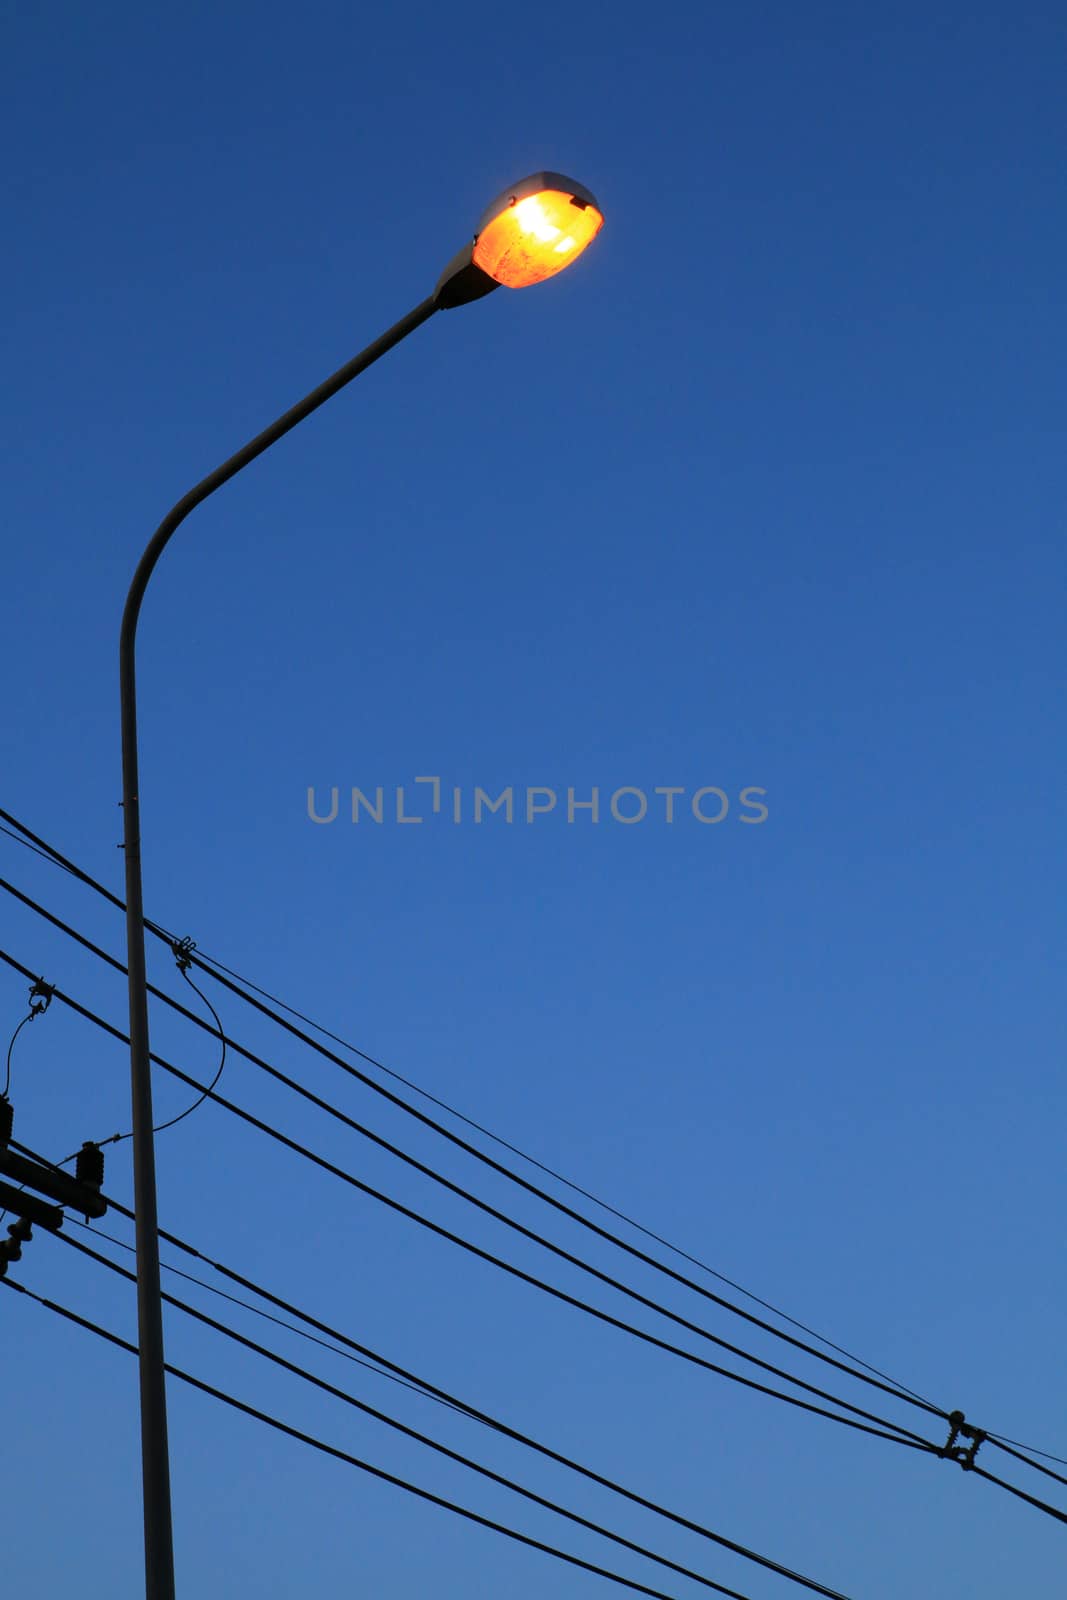 The streetlamp turn on the light automatically when dark.